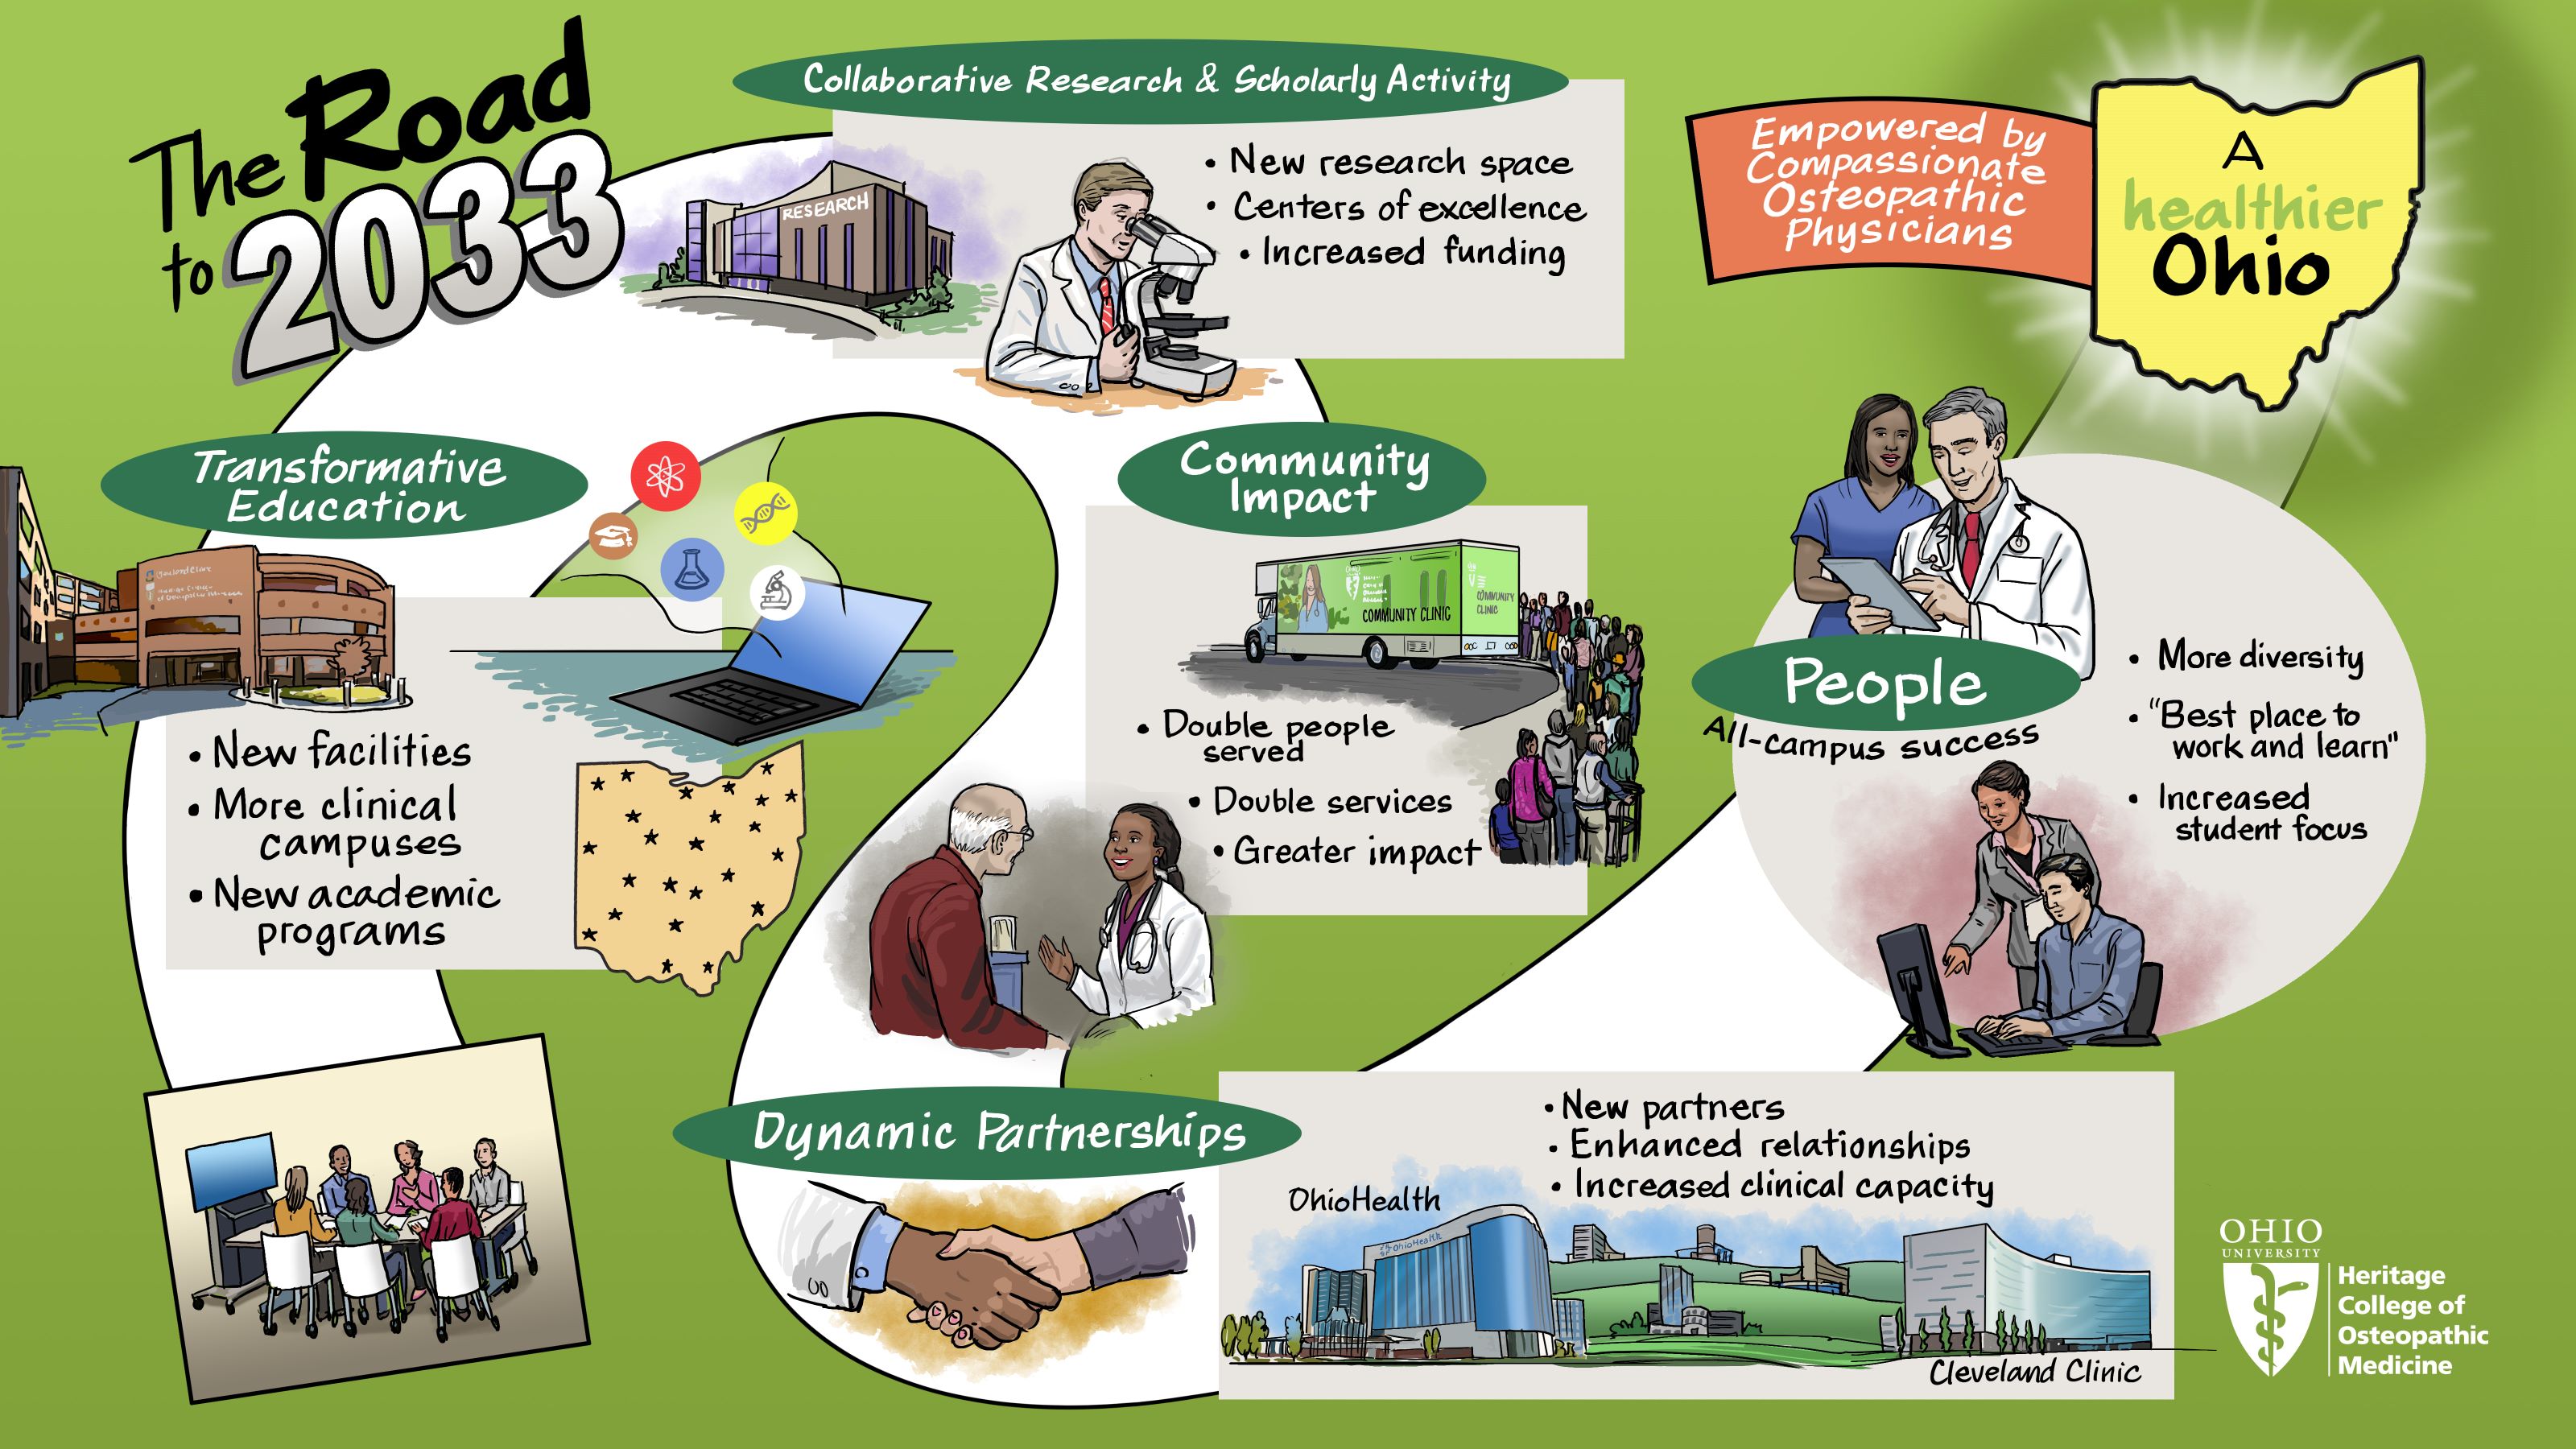 Infographic of a road showcasing Heritage College's strategic initiatives leading to 2033